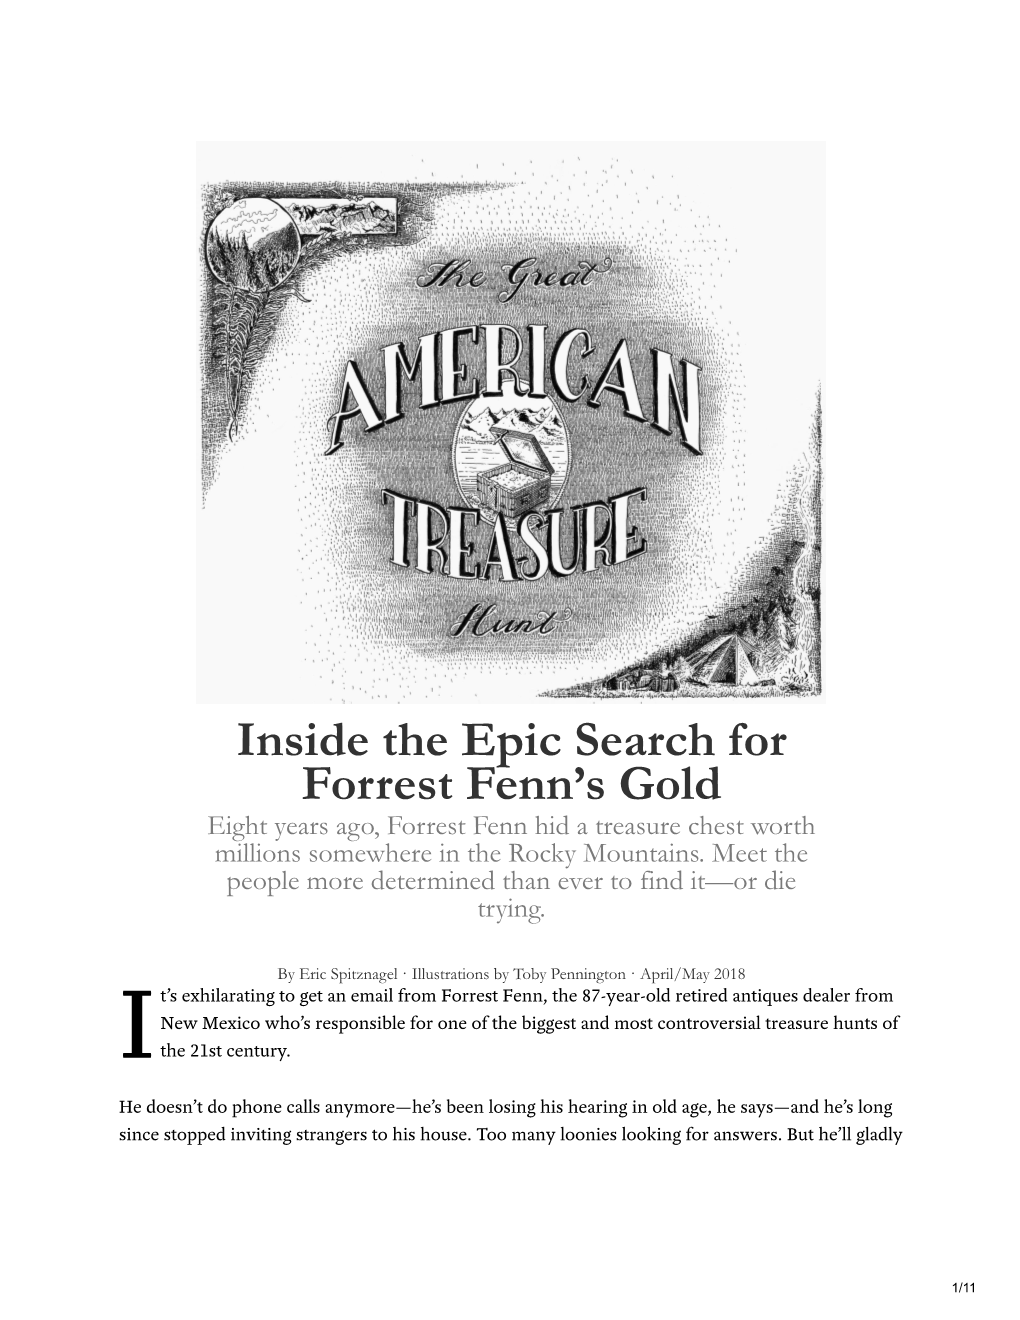 Inside the Epic Search for Forrest Fenn's Gold